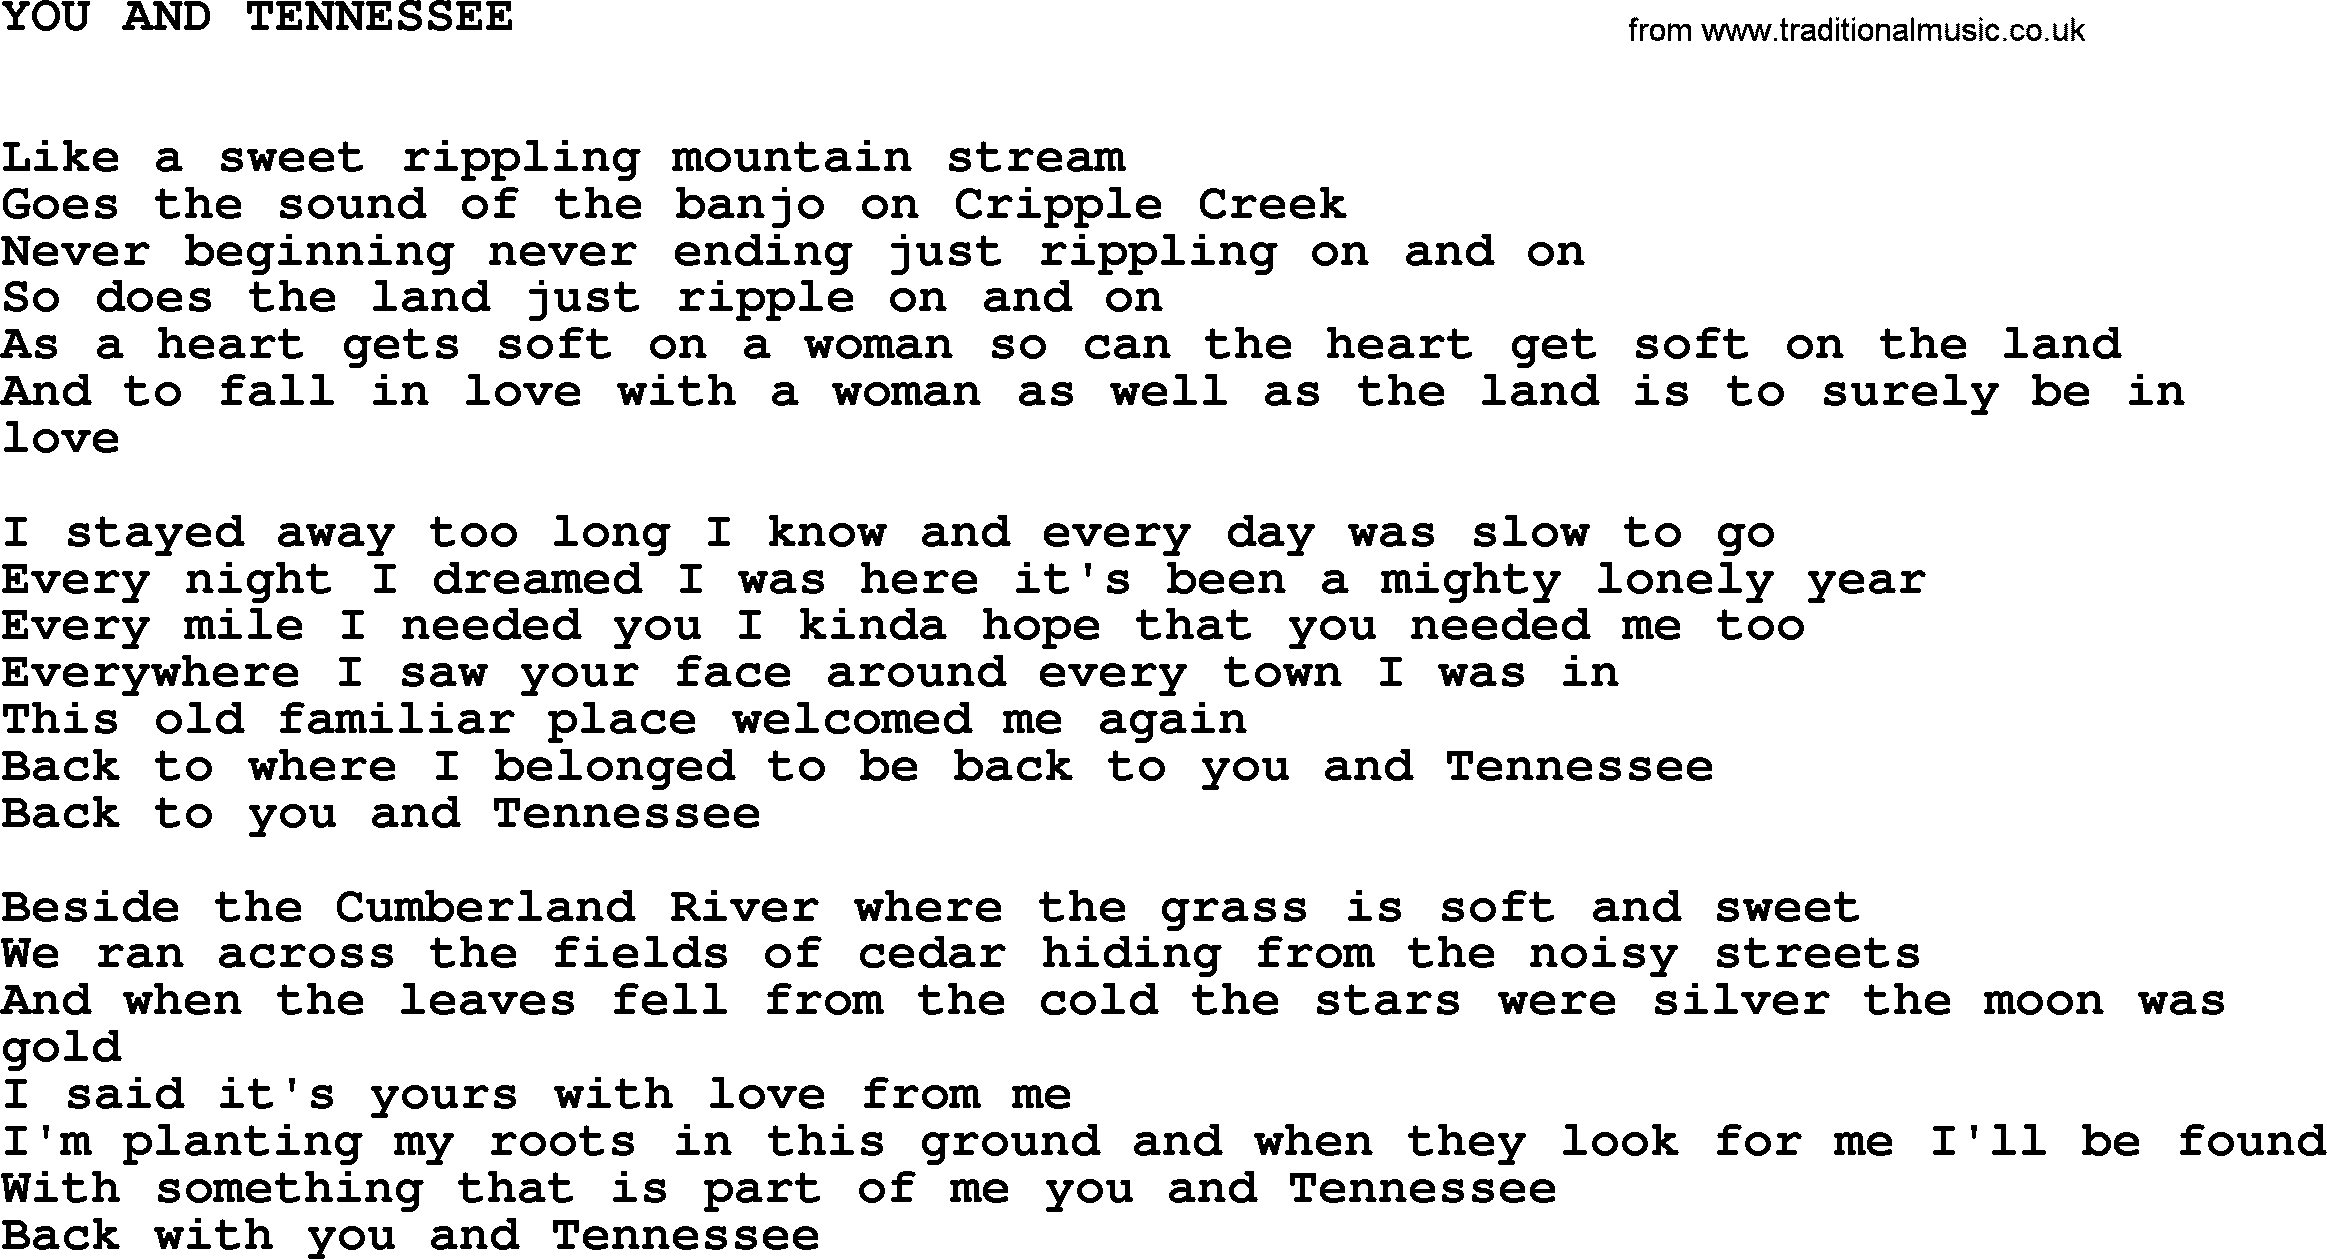 Johnny Cash song You And Tennessee.txt lyrics